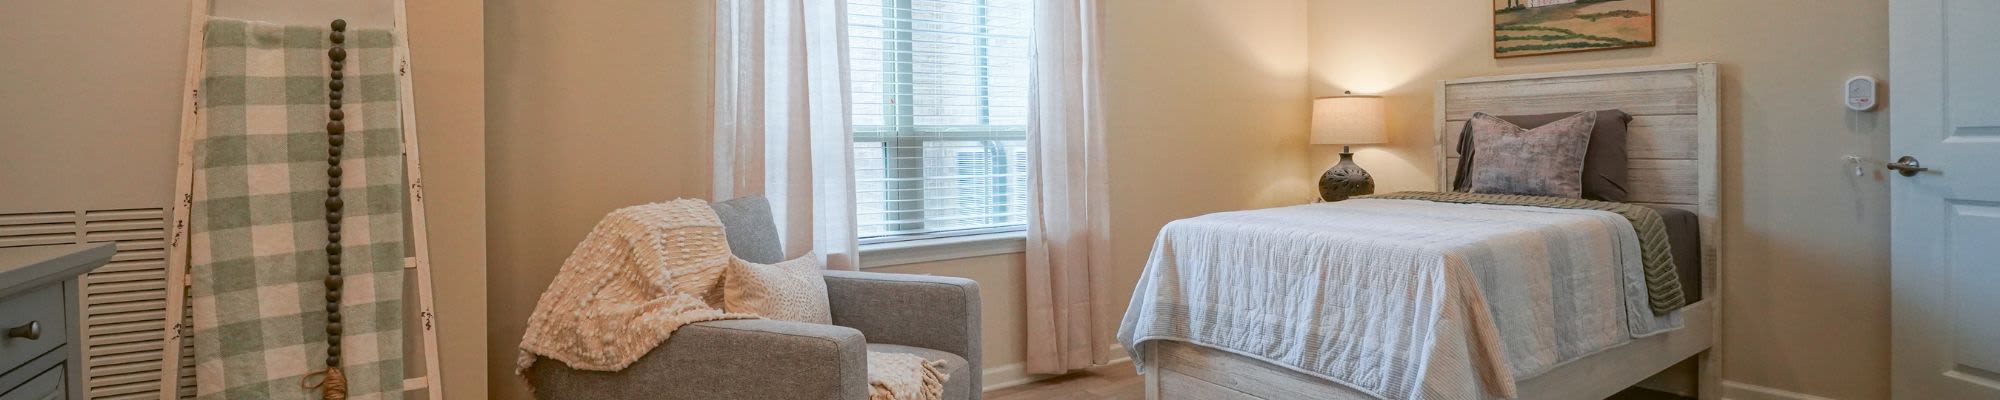 Memory Care at The Harmony Collection at Hanover in Mechanicsville, Virginia